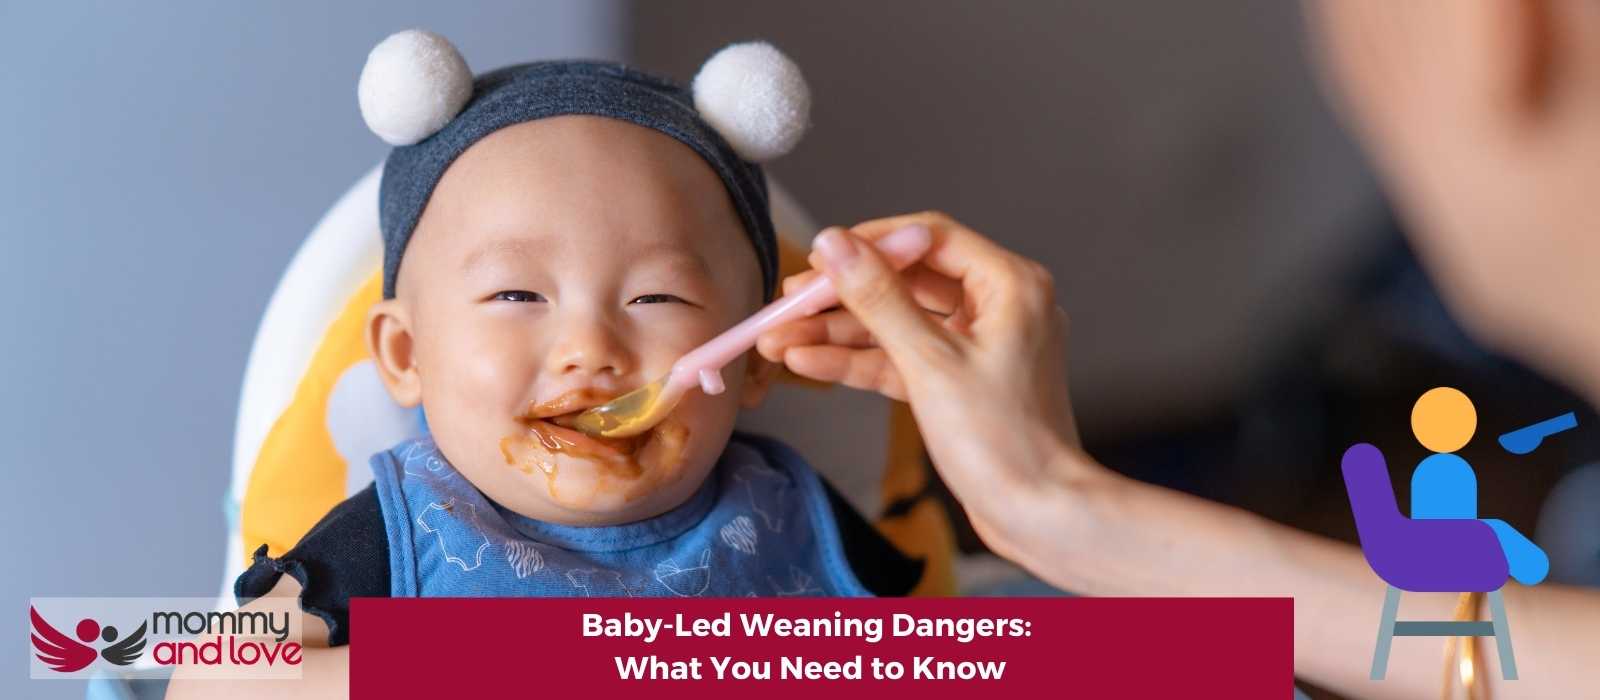 Baby-Led Weaning Dangers What You Need to Know